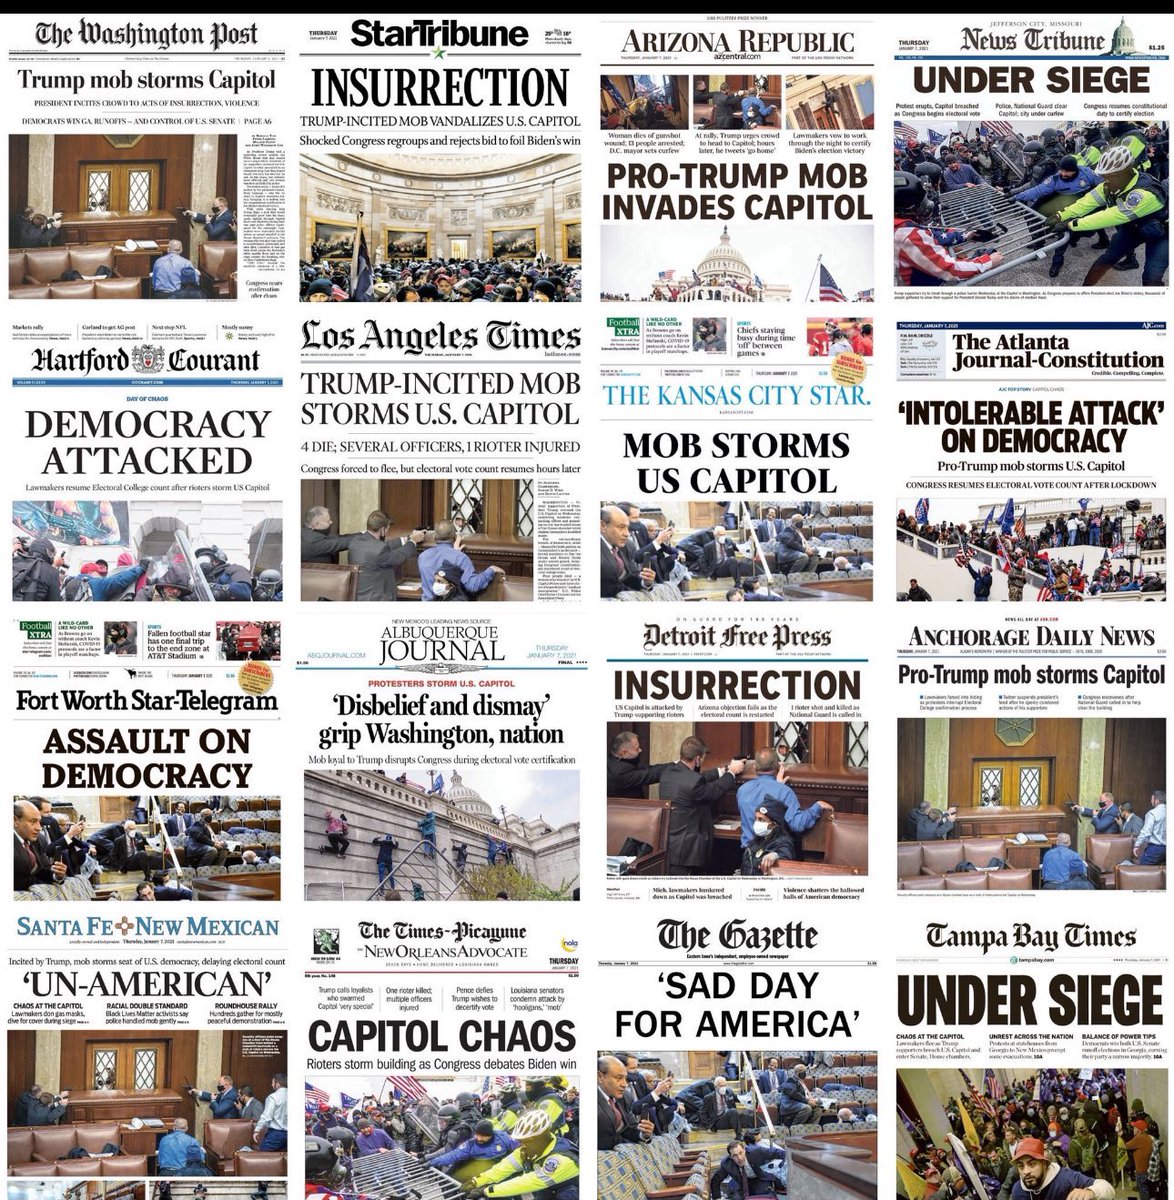 Just a few headlines…never forget!